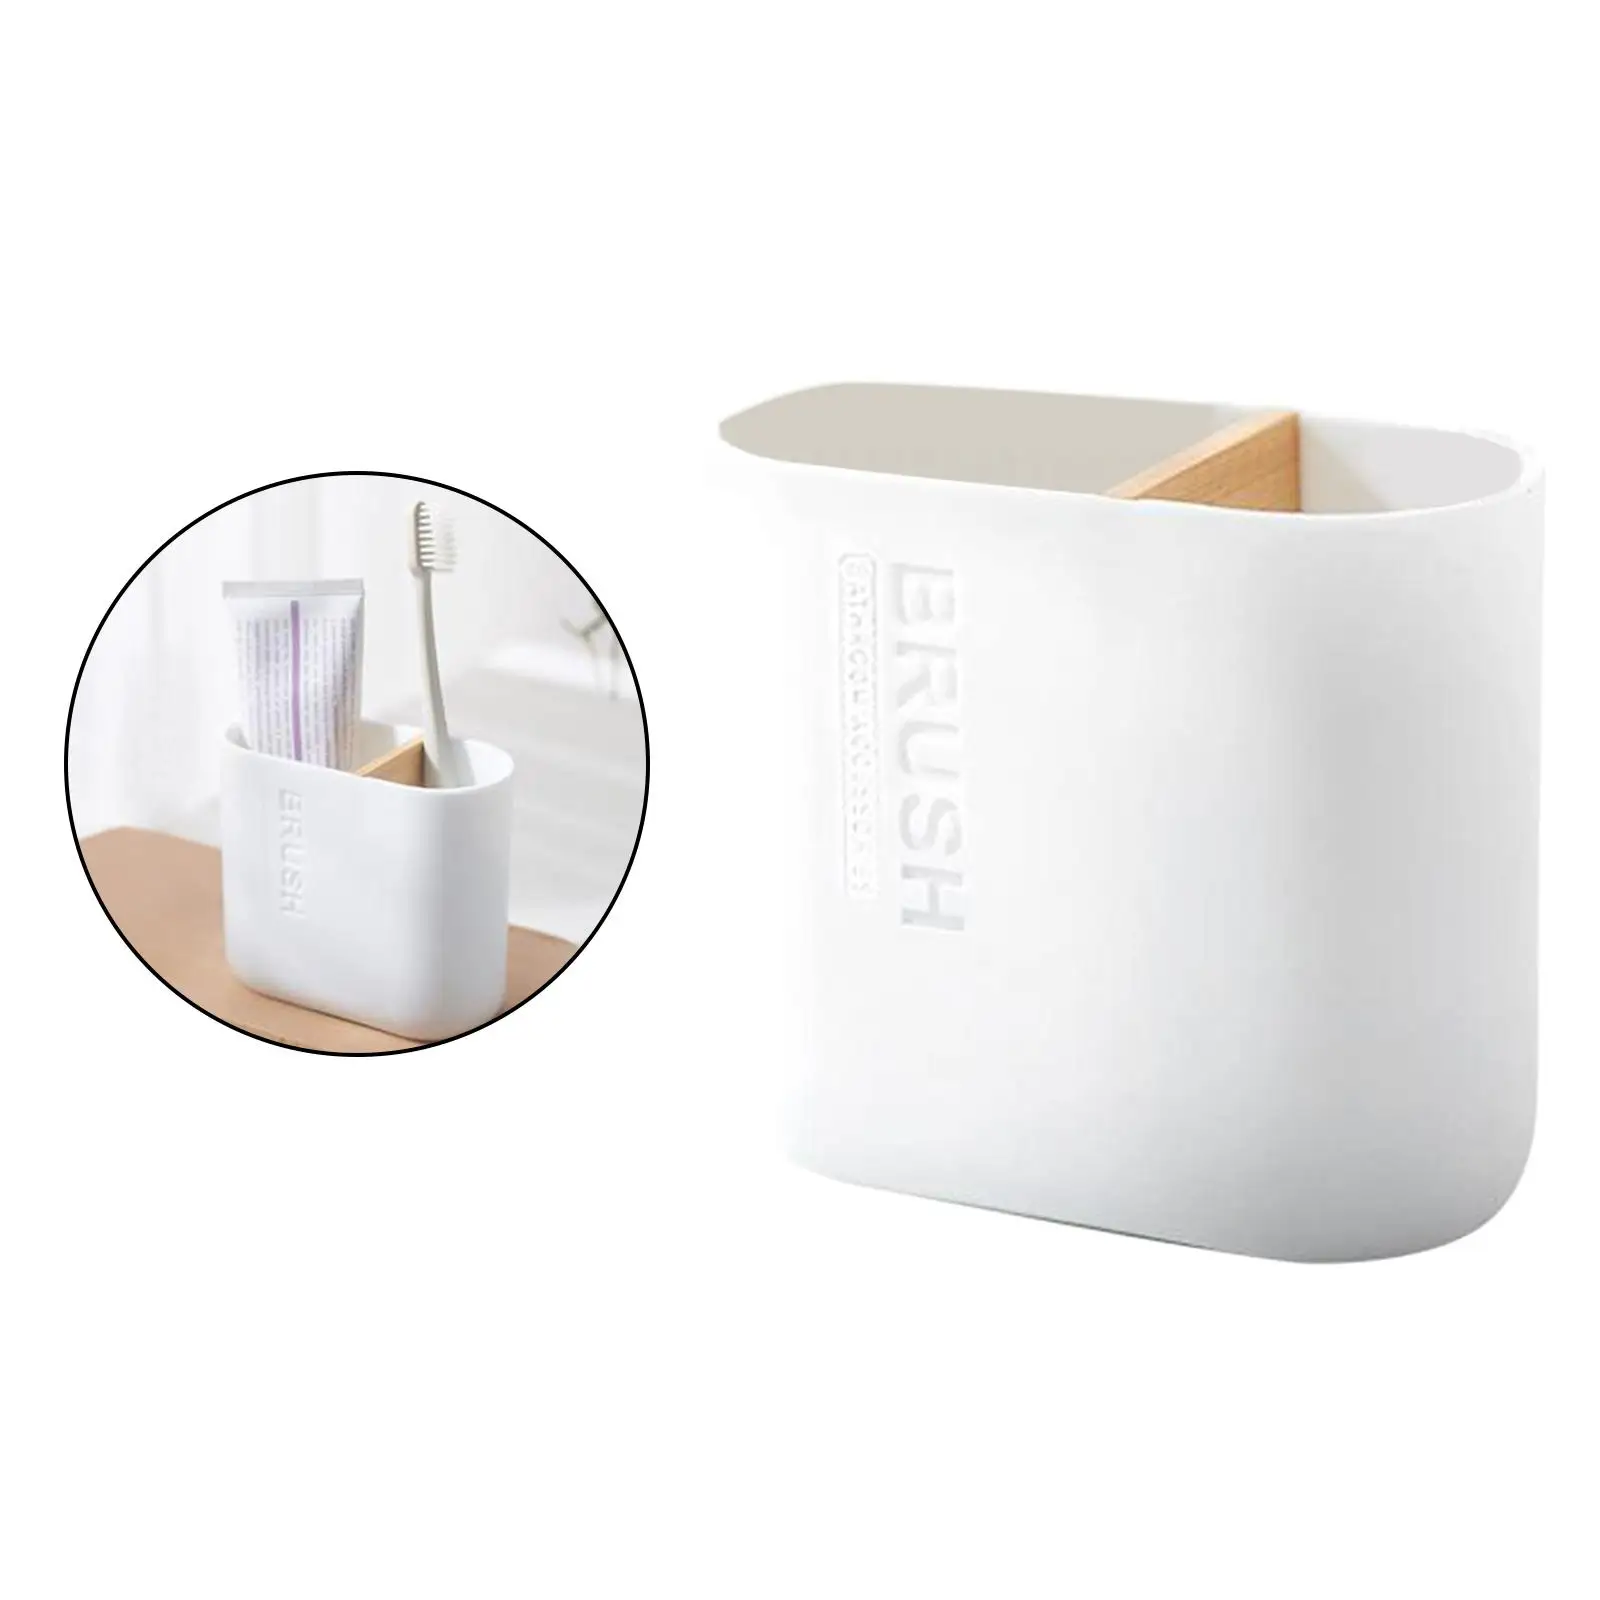 Bathroom Accessories for Hotel Bath Countertop Decor Durable White Color Smooth Easily Clean Dispenser PP Fashionable